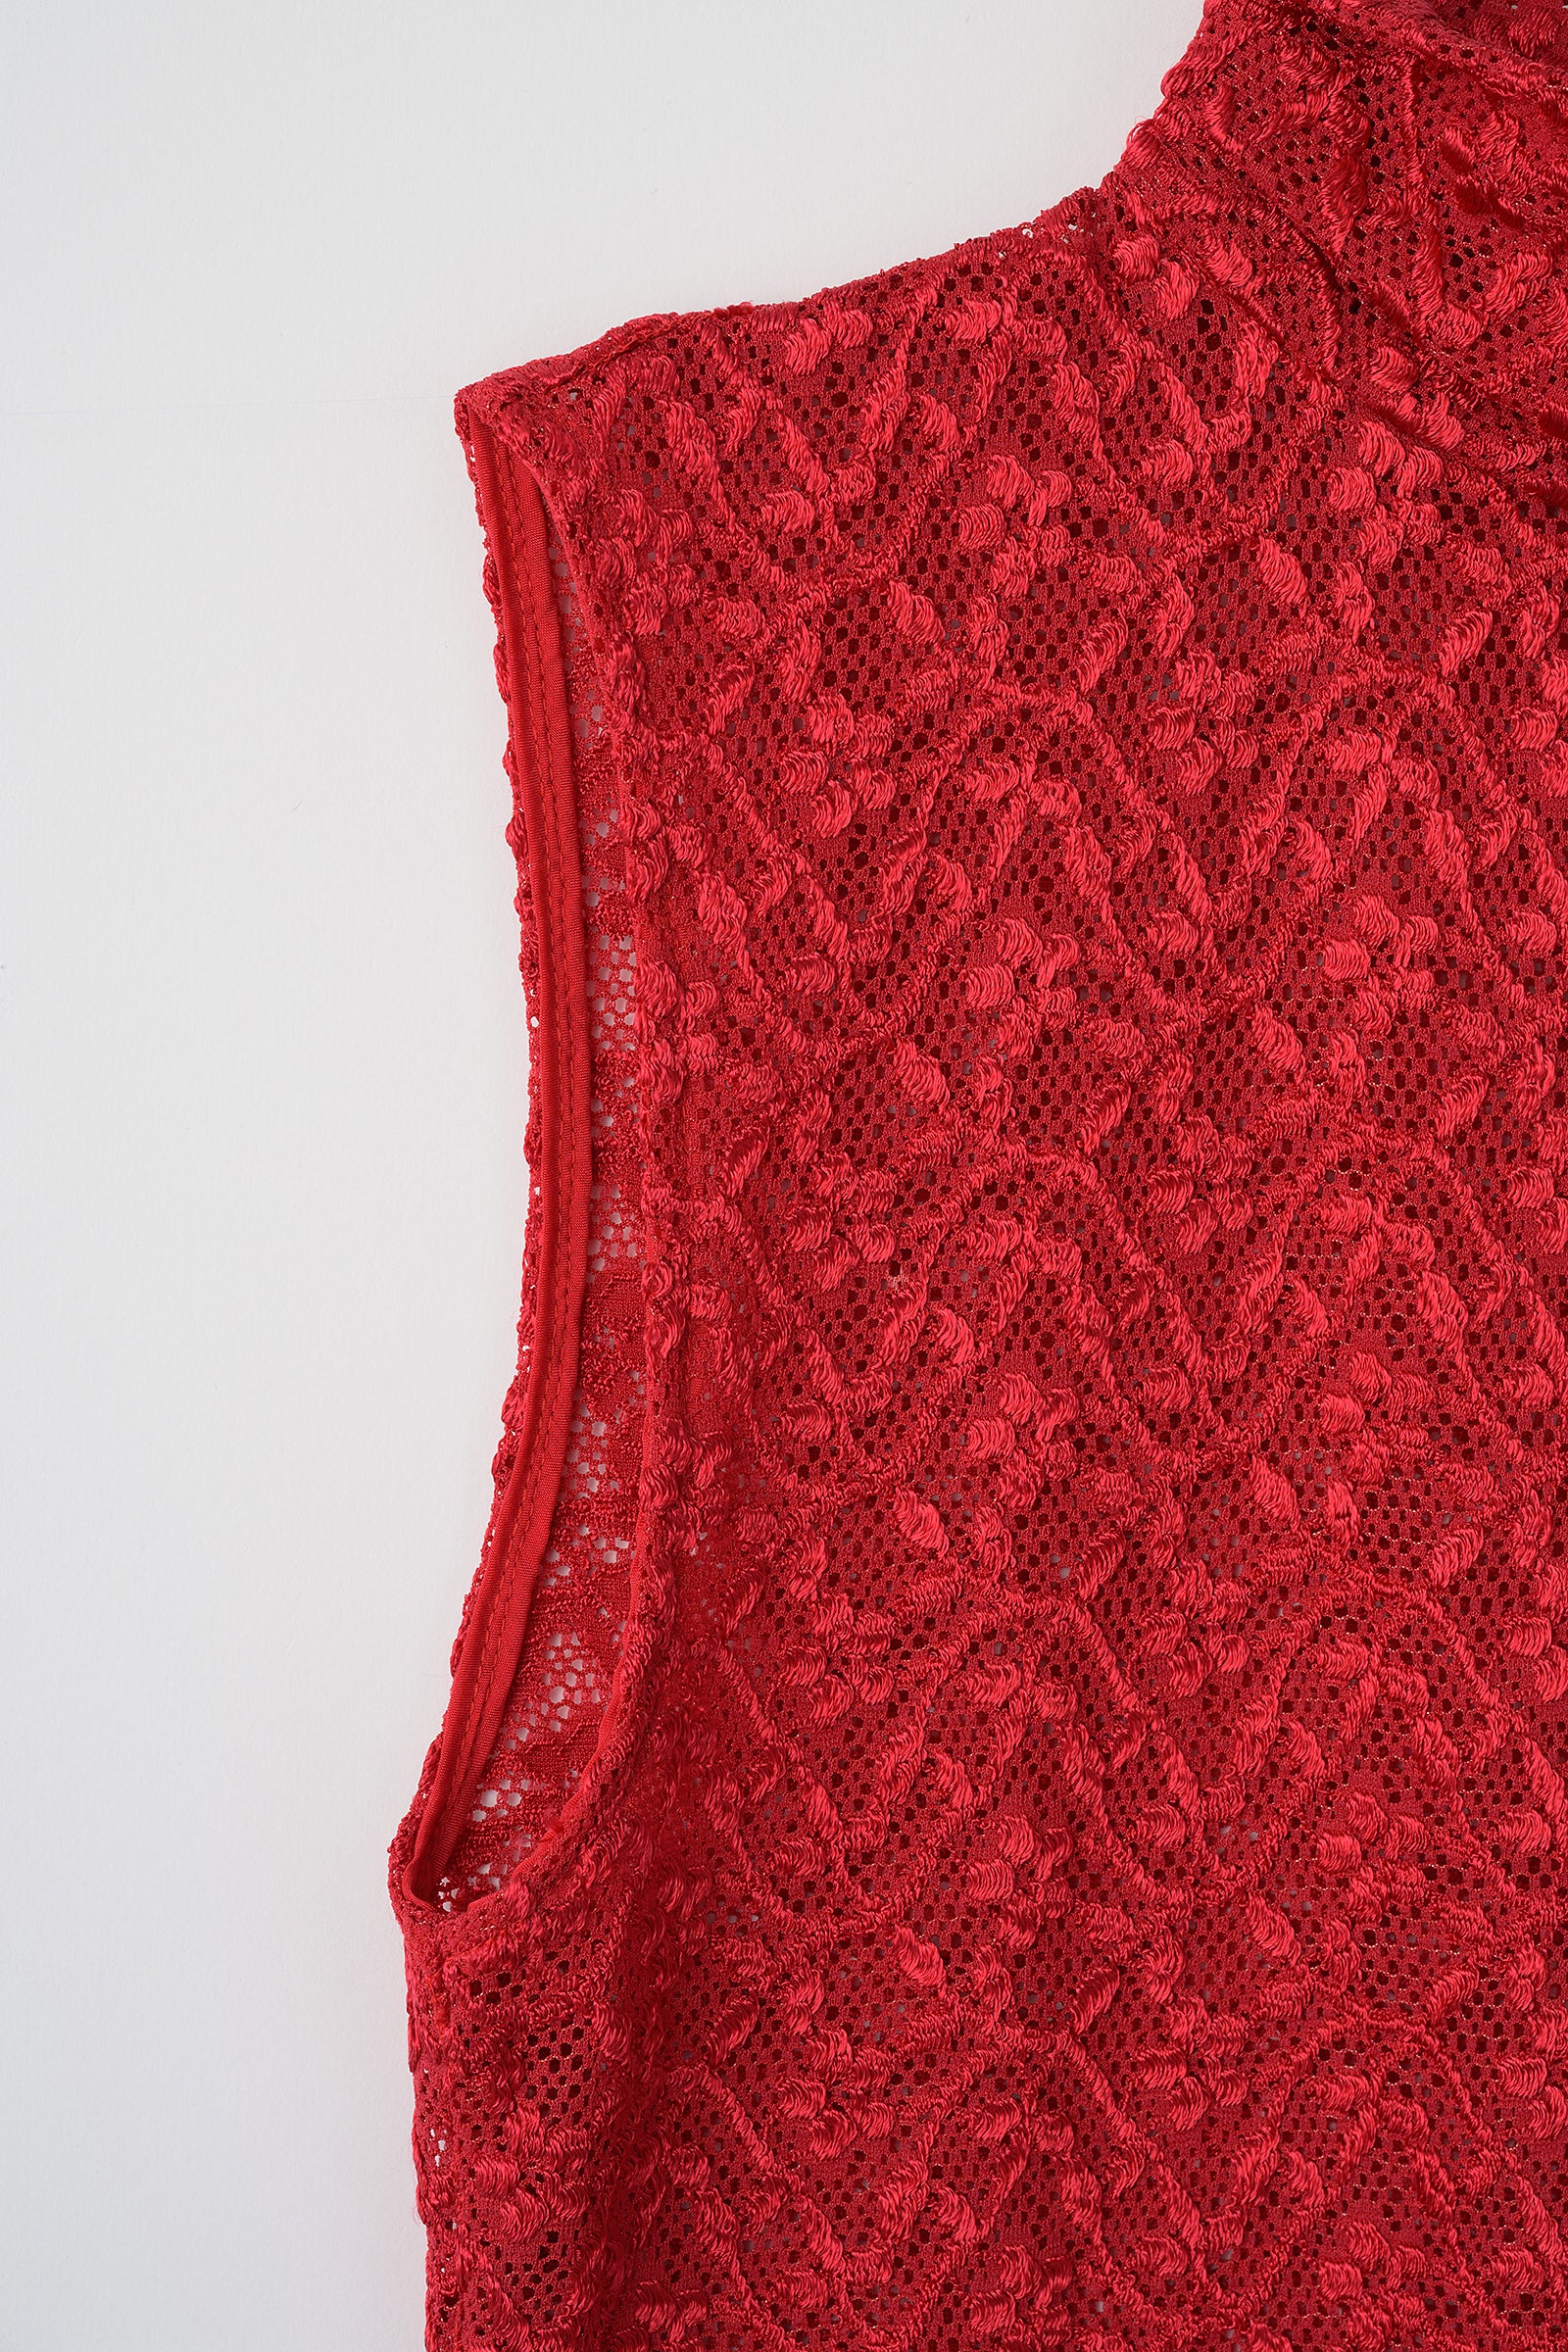 Stretch lace sleeveless top (Red)